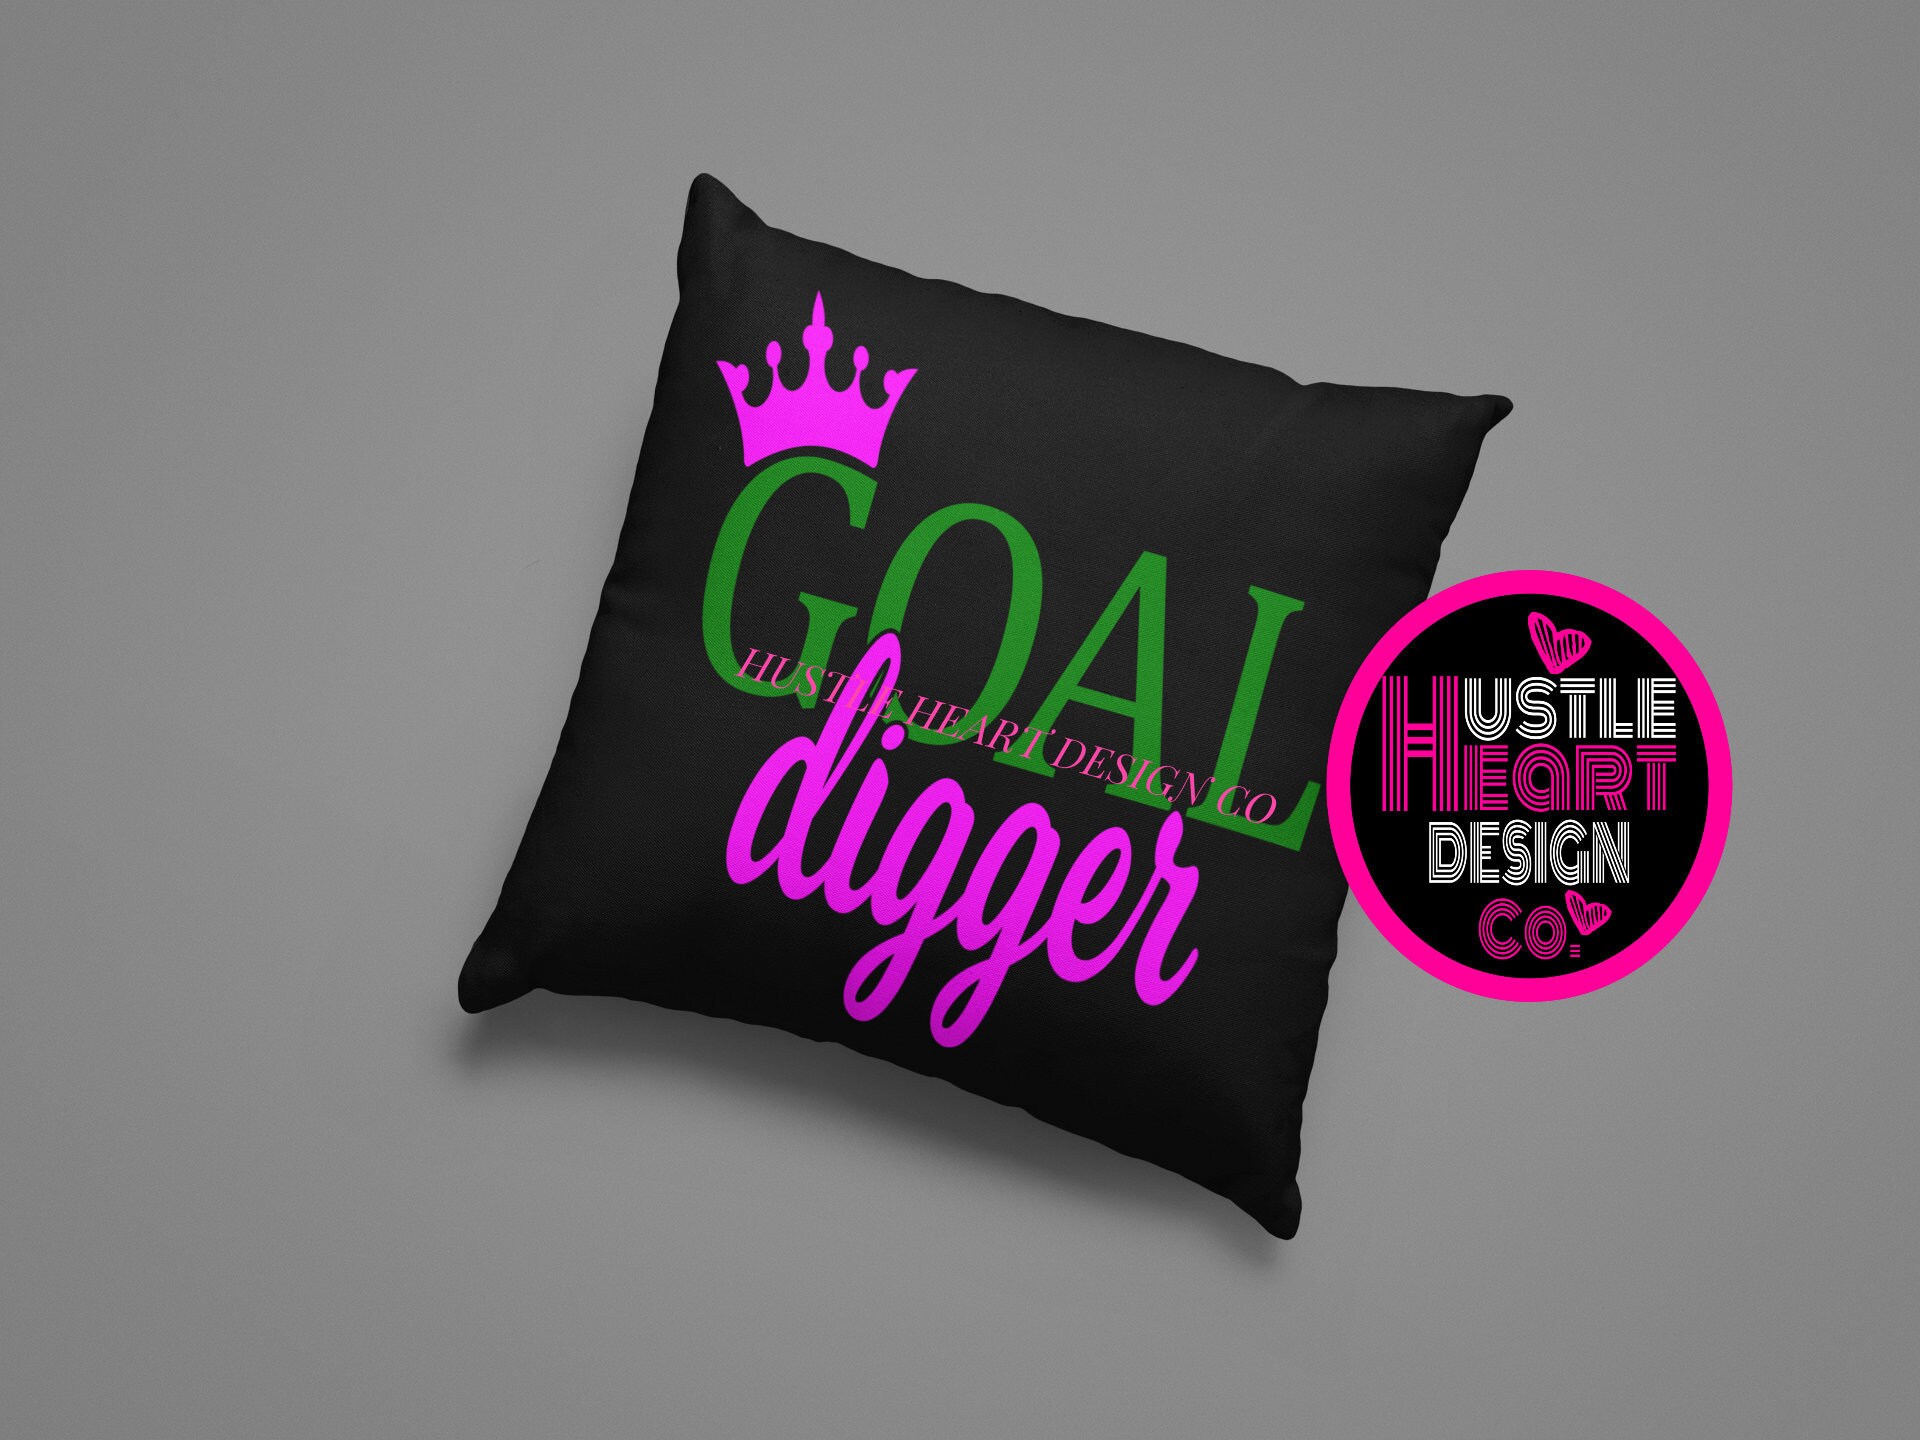 Goal Digger Gift Printable Definition Instant Download 8x10 